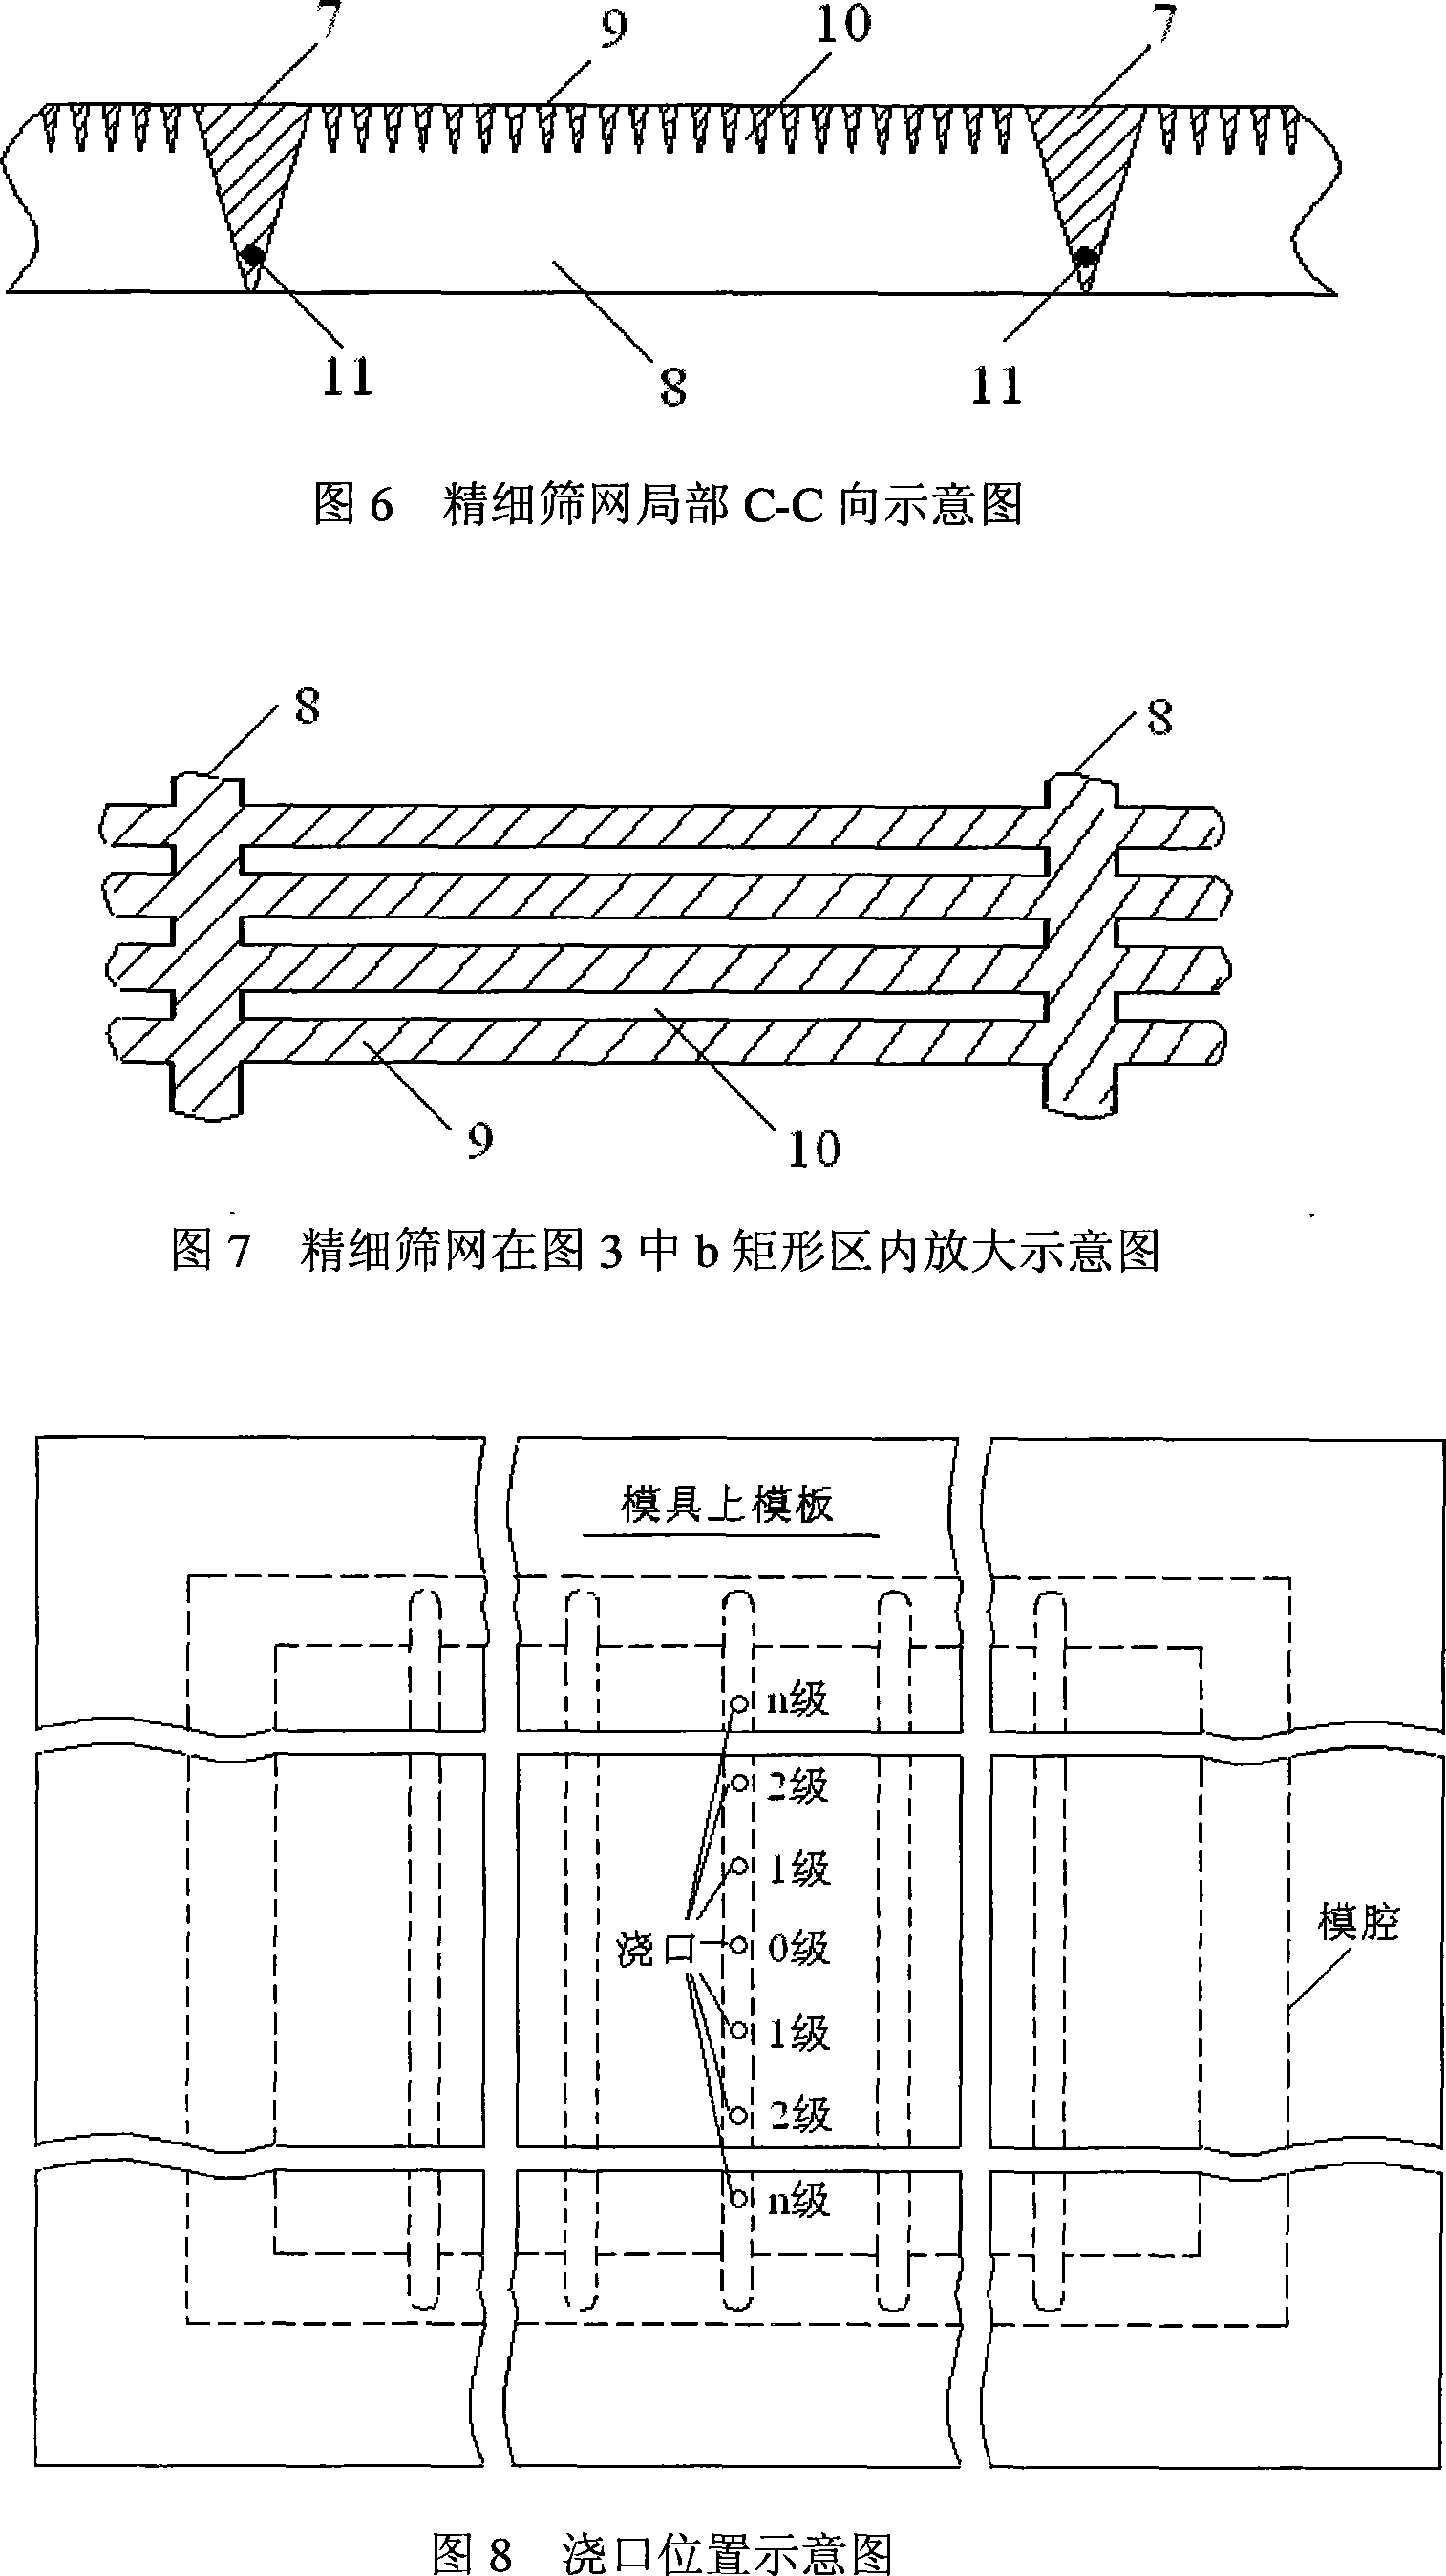 Fabric reinforced polyurethane fine sieve and its forming method